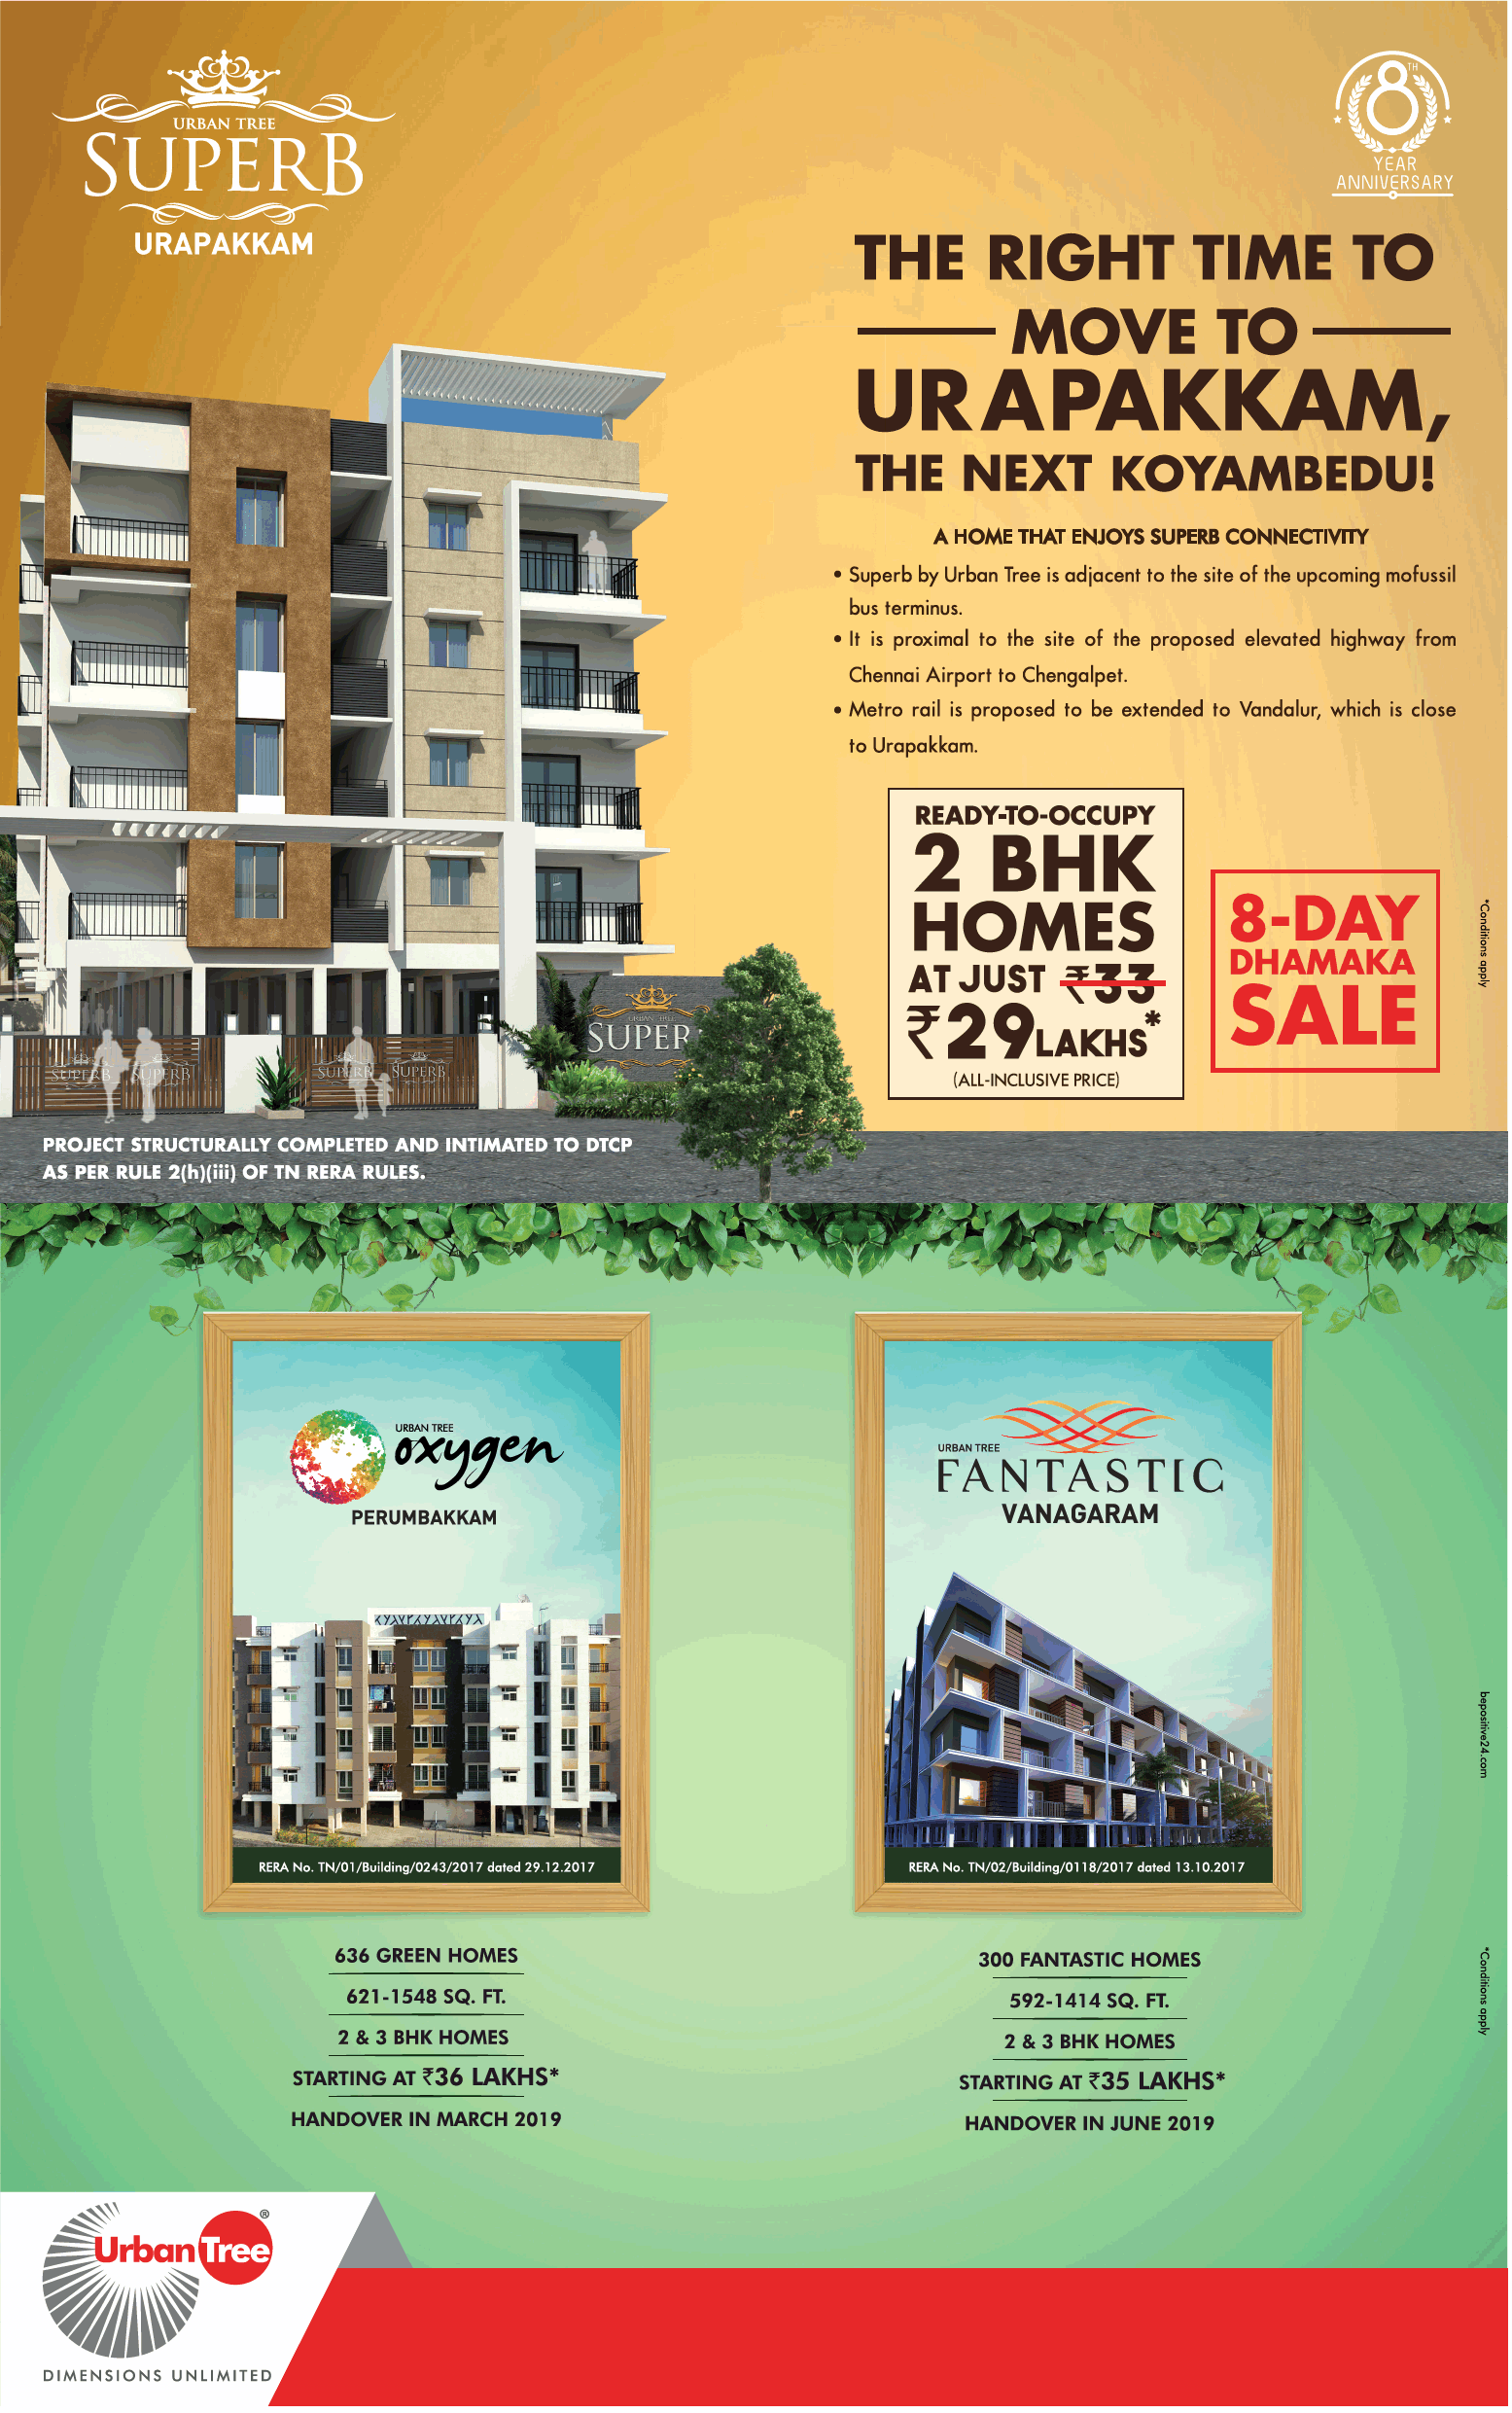 Ready to occupy 2 bhk homes at Rs. 29 lakhs at Urban Tree Projects in Chennai Update